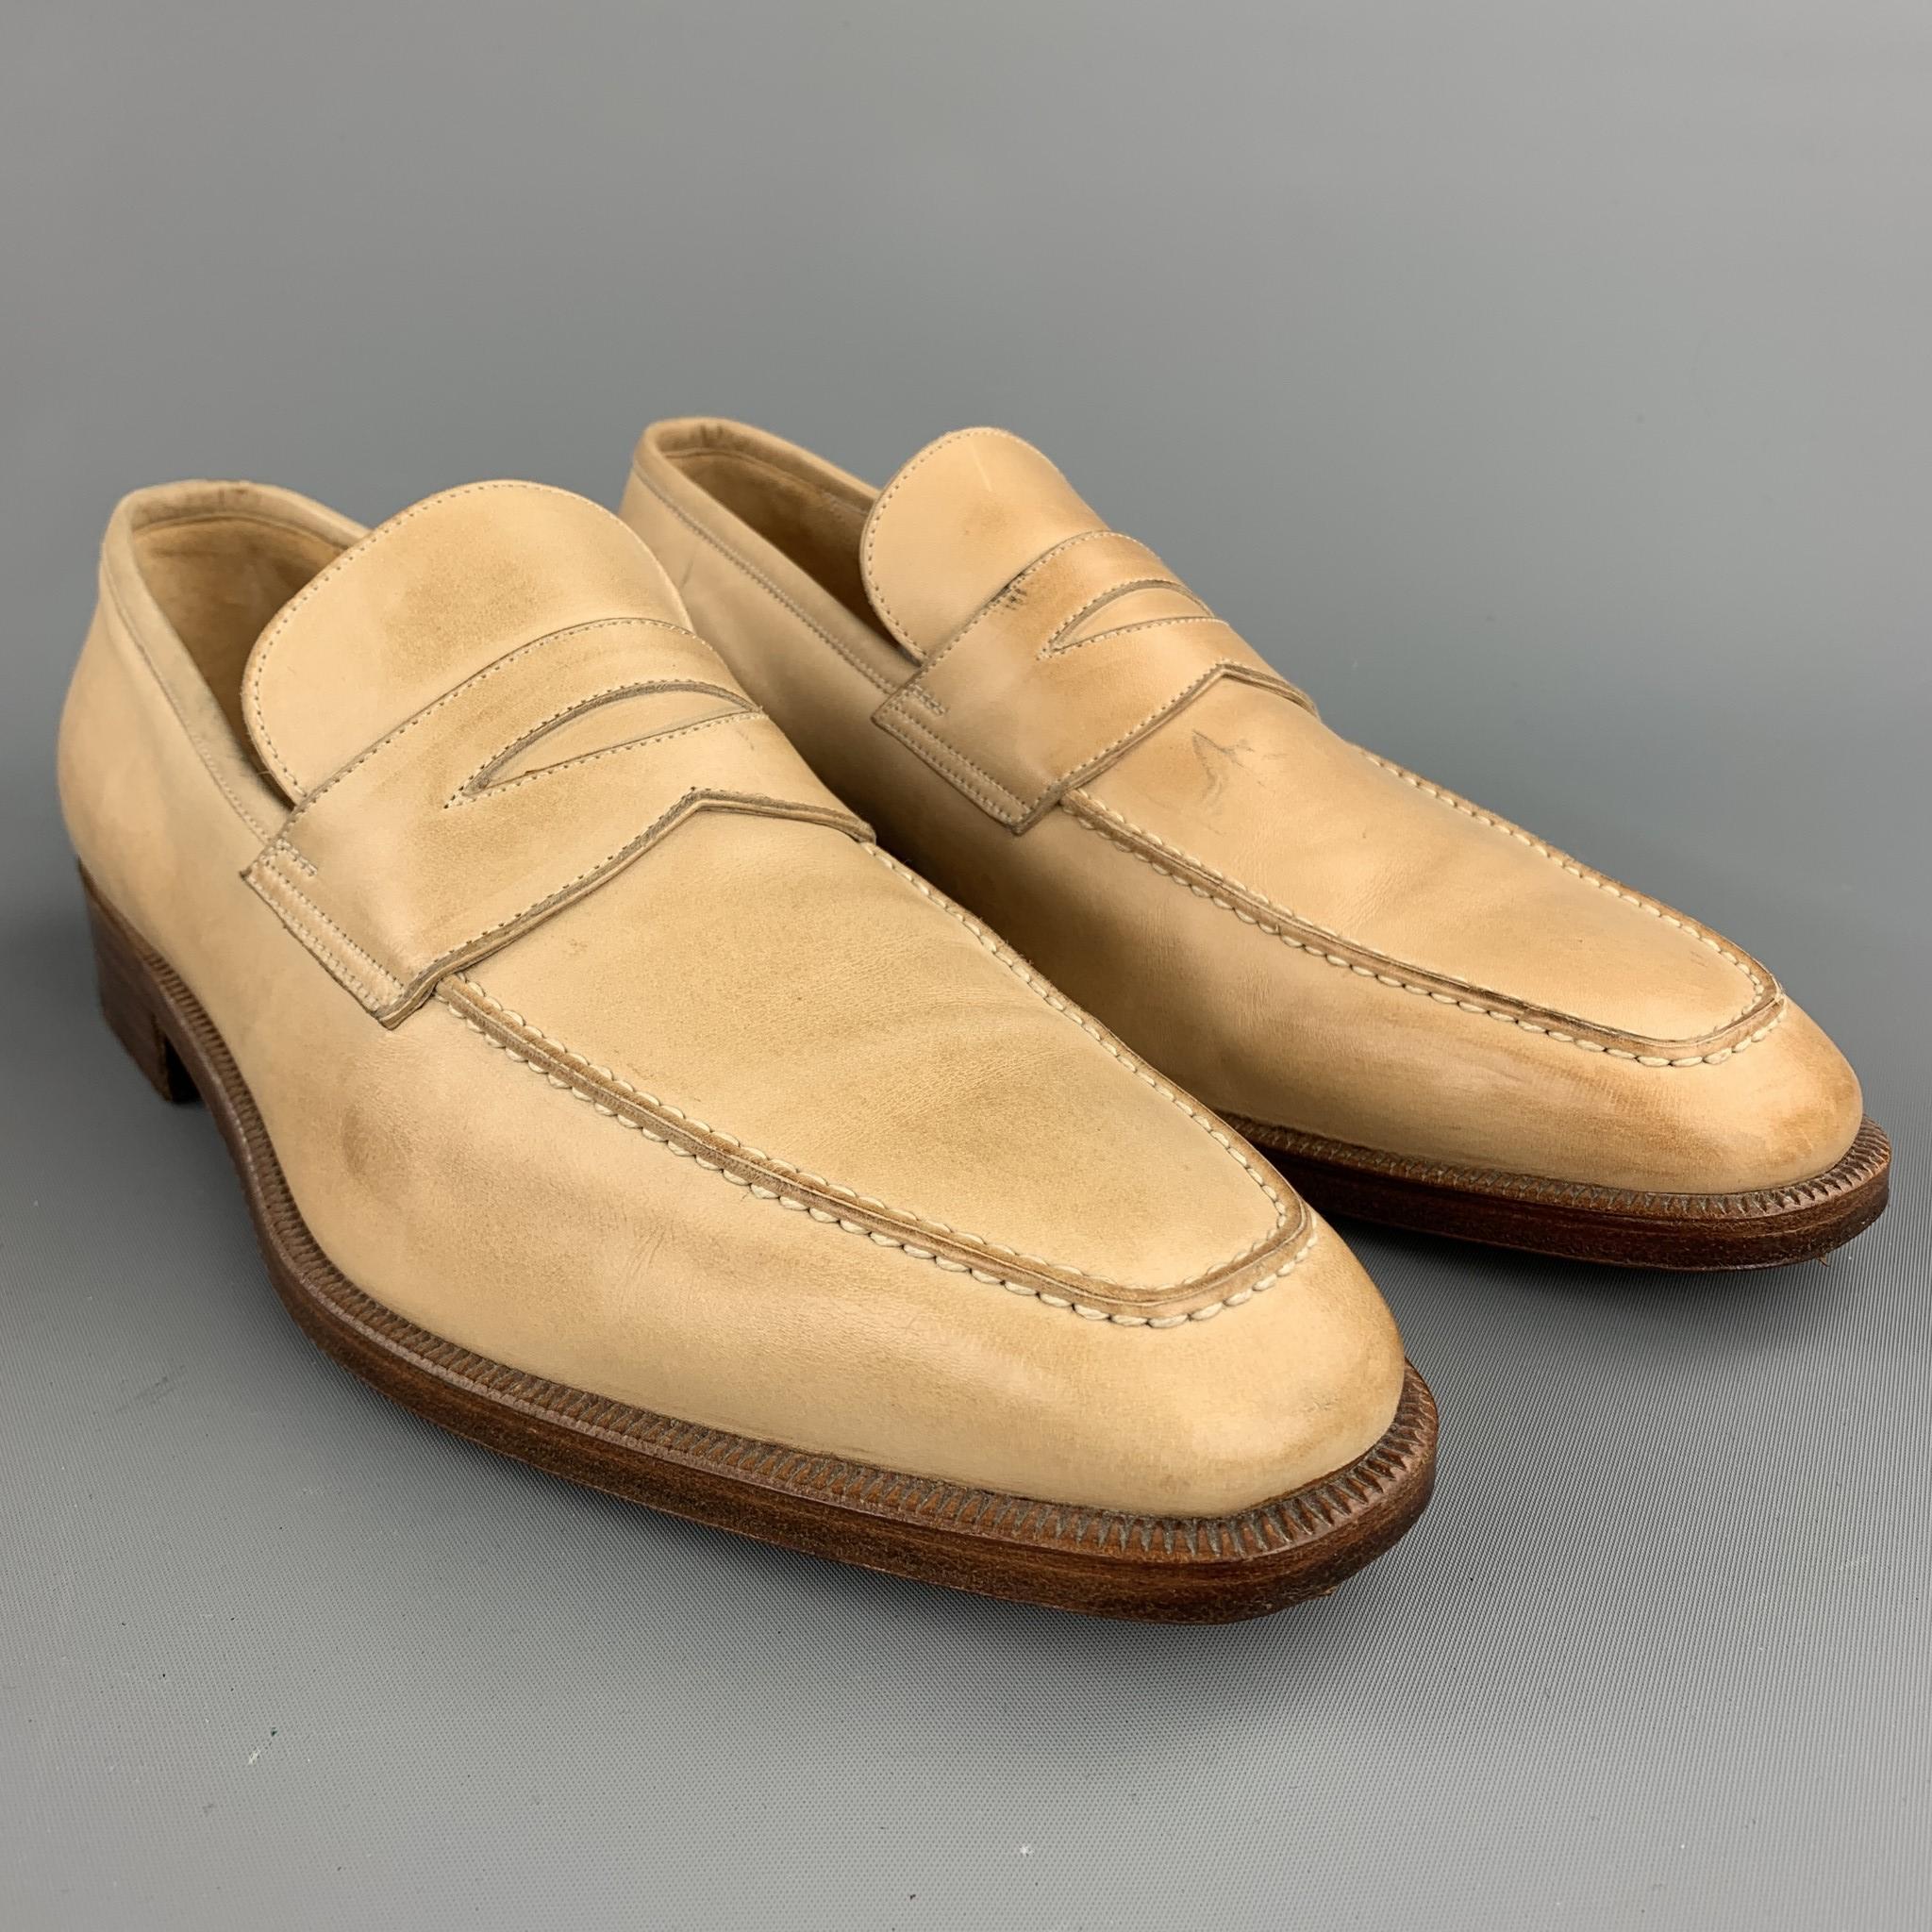 GRAVATI per WILSON and DEAN for WILKES BASHFORD loafers comes in a natural leather featuring a penny strap, contrast stitching, and a wooden sole. Wear throughout. Made in Italy.

Very Good Pre-Owned Condition.
Marked: 8.5 M
